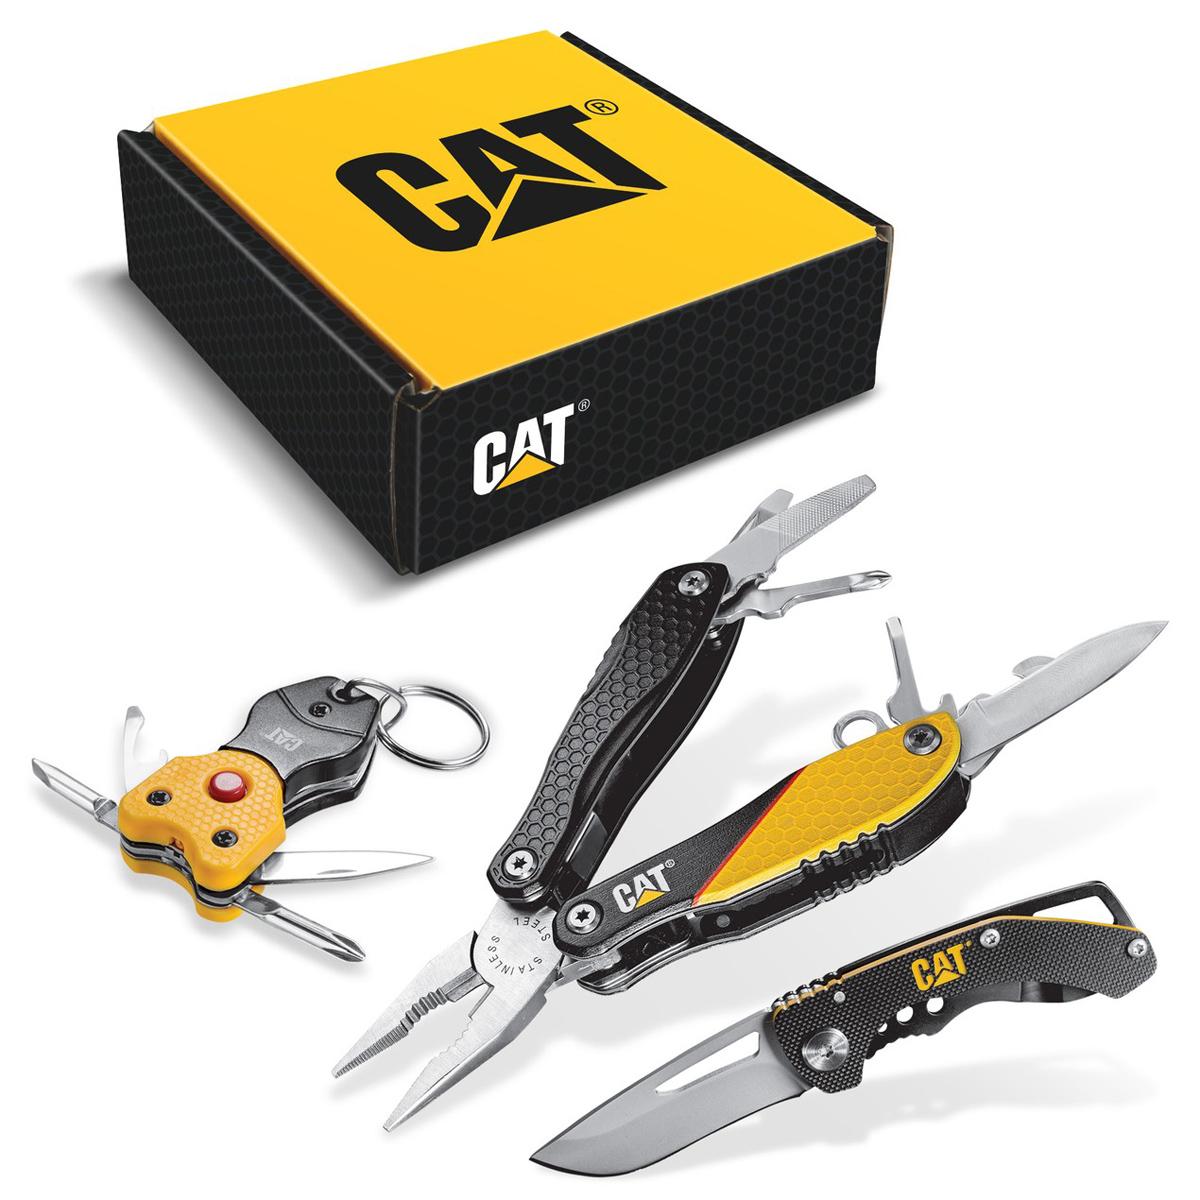 CAT 3-Piece Multi-Tool and Pocket Knife Bundle for $23.99 Shipped